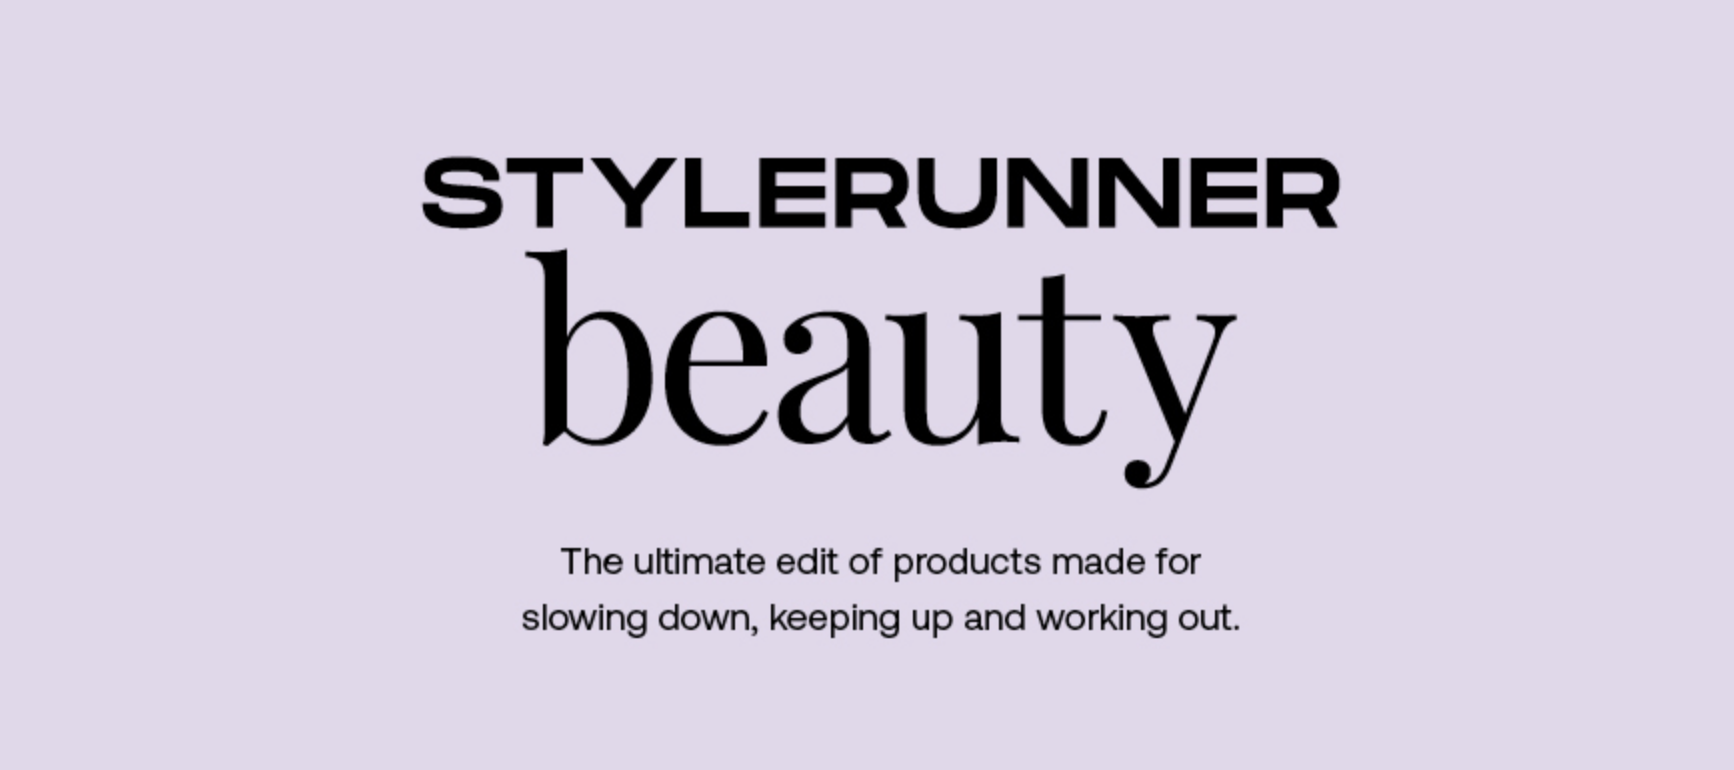 Stylerunner introduces beauty and self-care edit